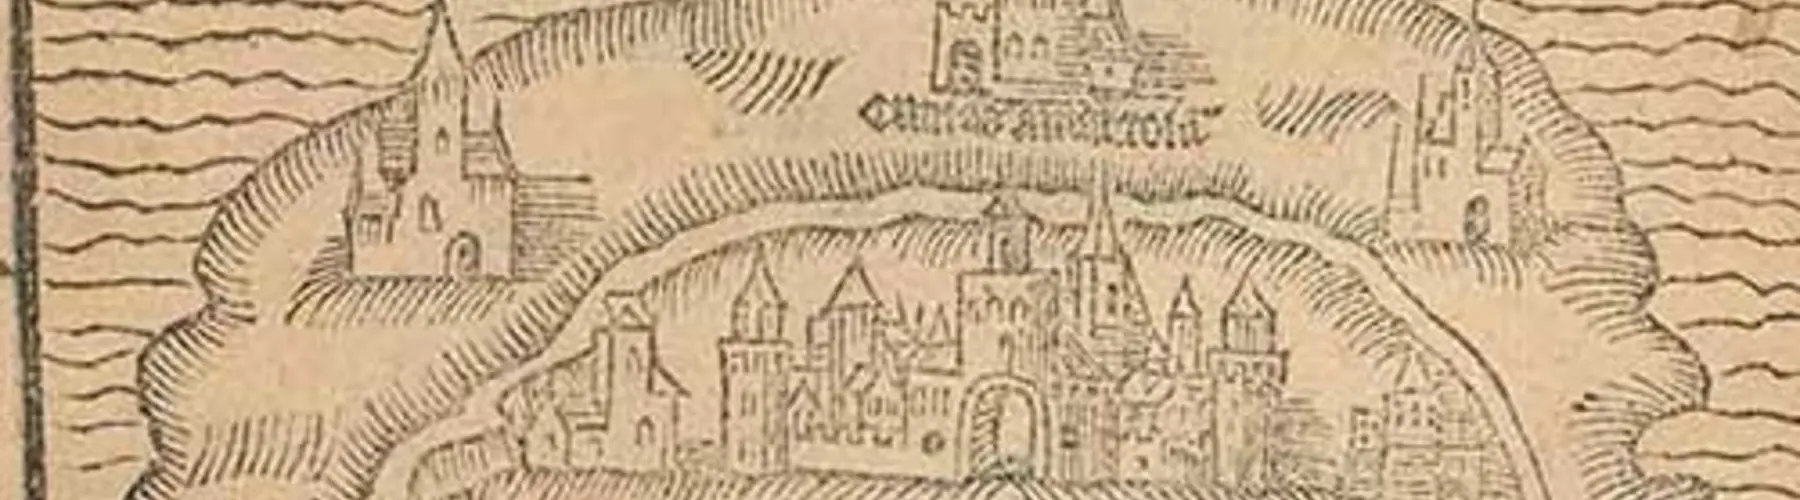 Detail of ship from Thomas More Utopia